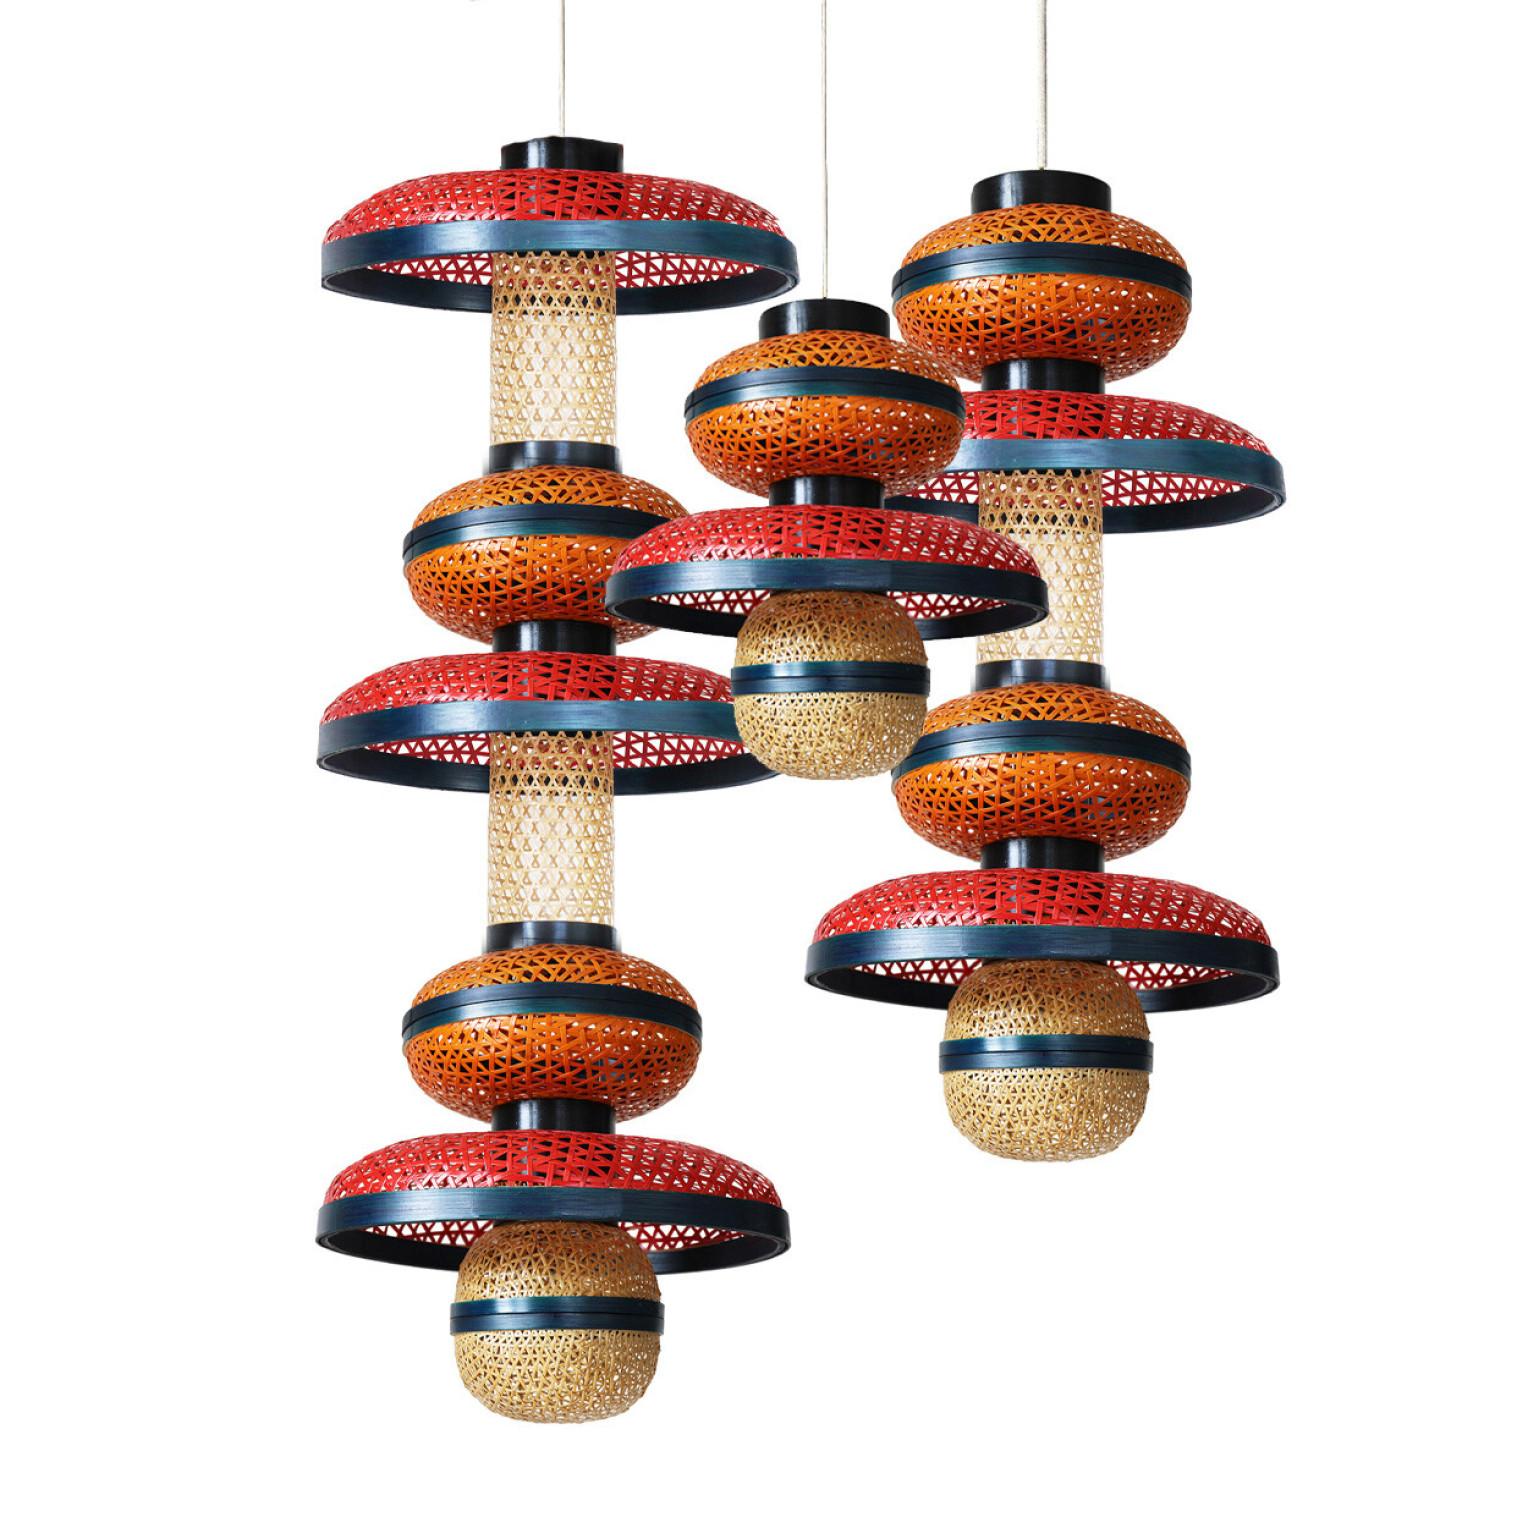 ‘Sprout Bamboo Chandelier’ brings traditional and ancient bamboo weaving into the modern interior space, showing the visual identity and functionality of this fascinating material. The modular bamboo woven chandelier is inspired by Fuchsia and